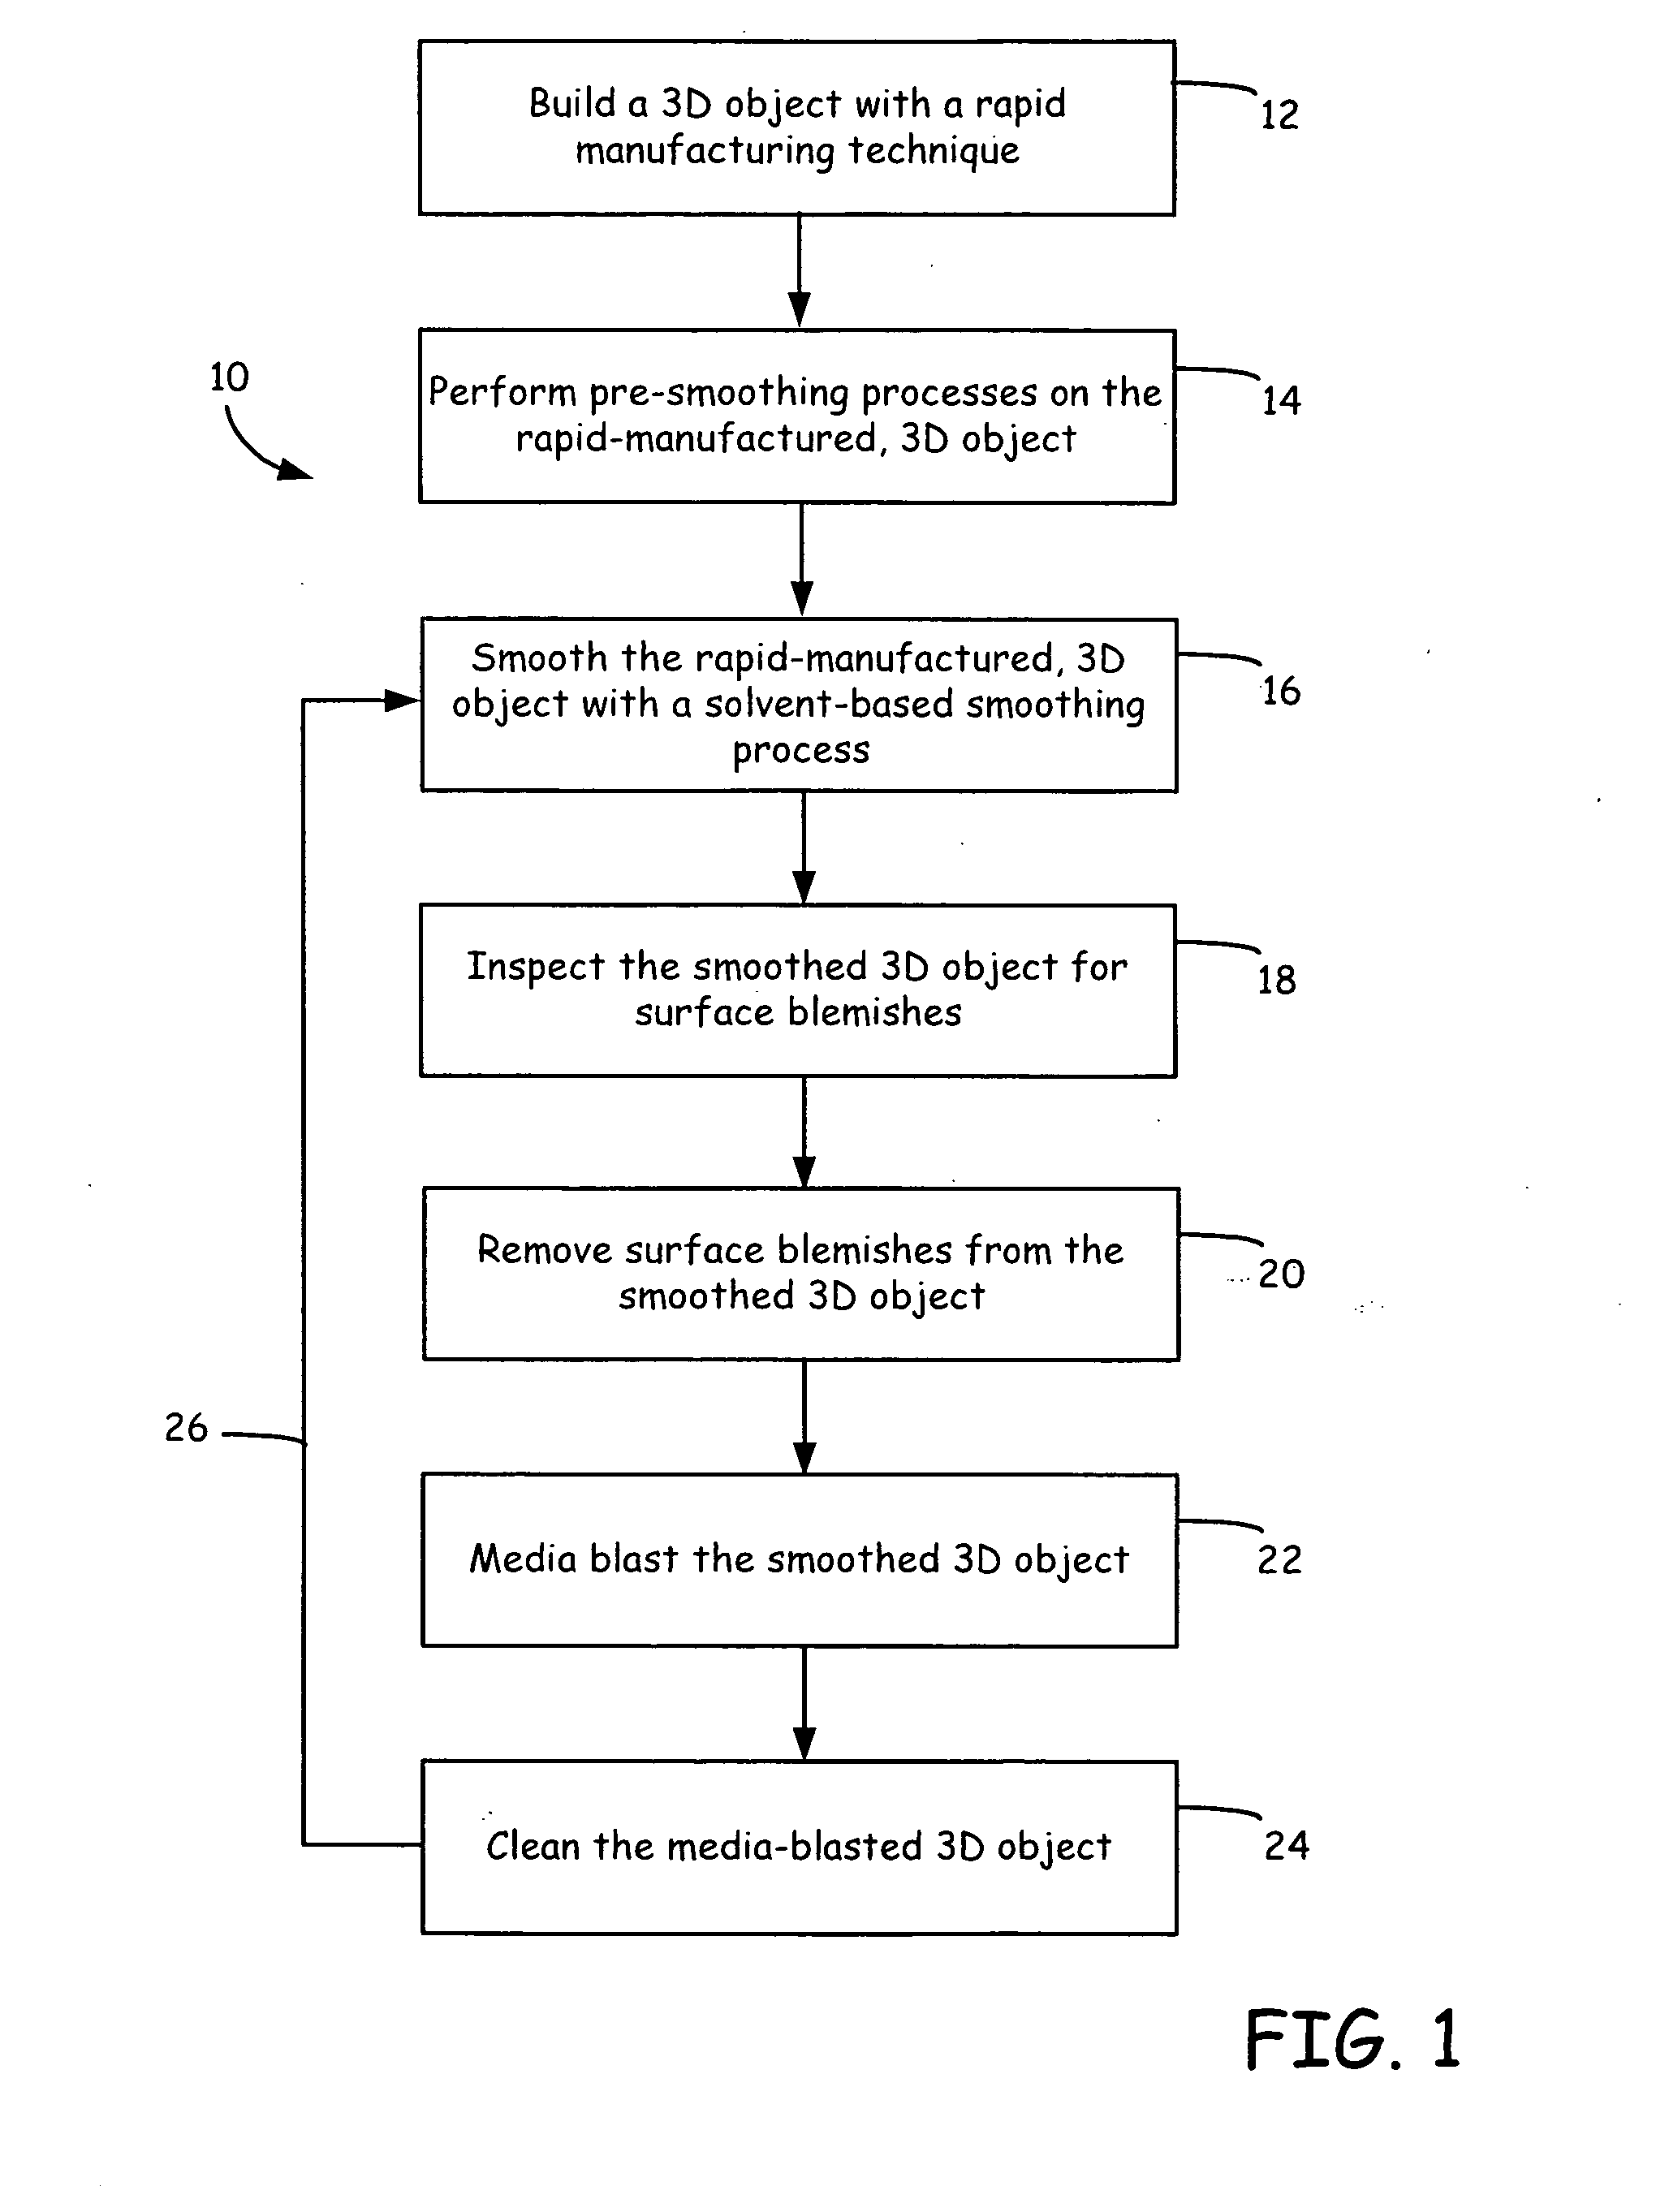 Surface-treatment method for rapid-manufactured three-dimensional objects